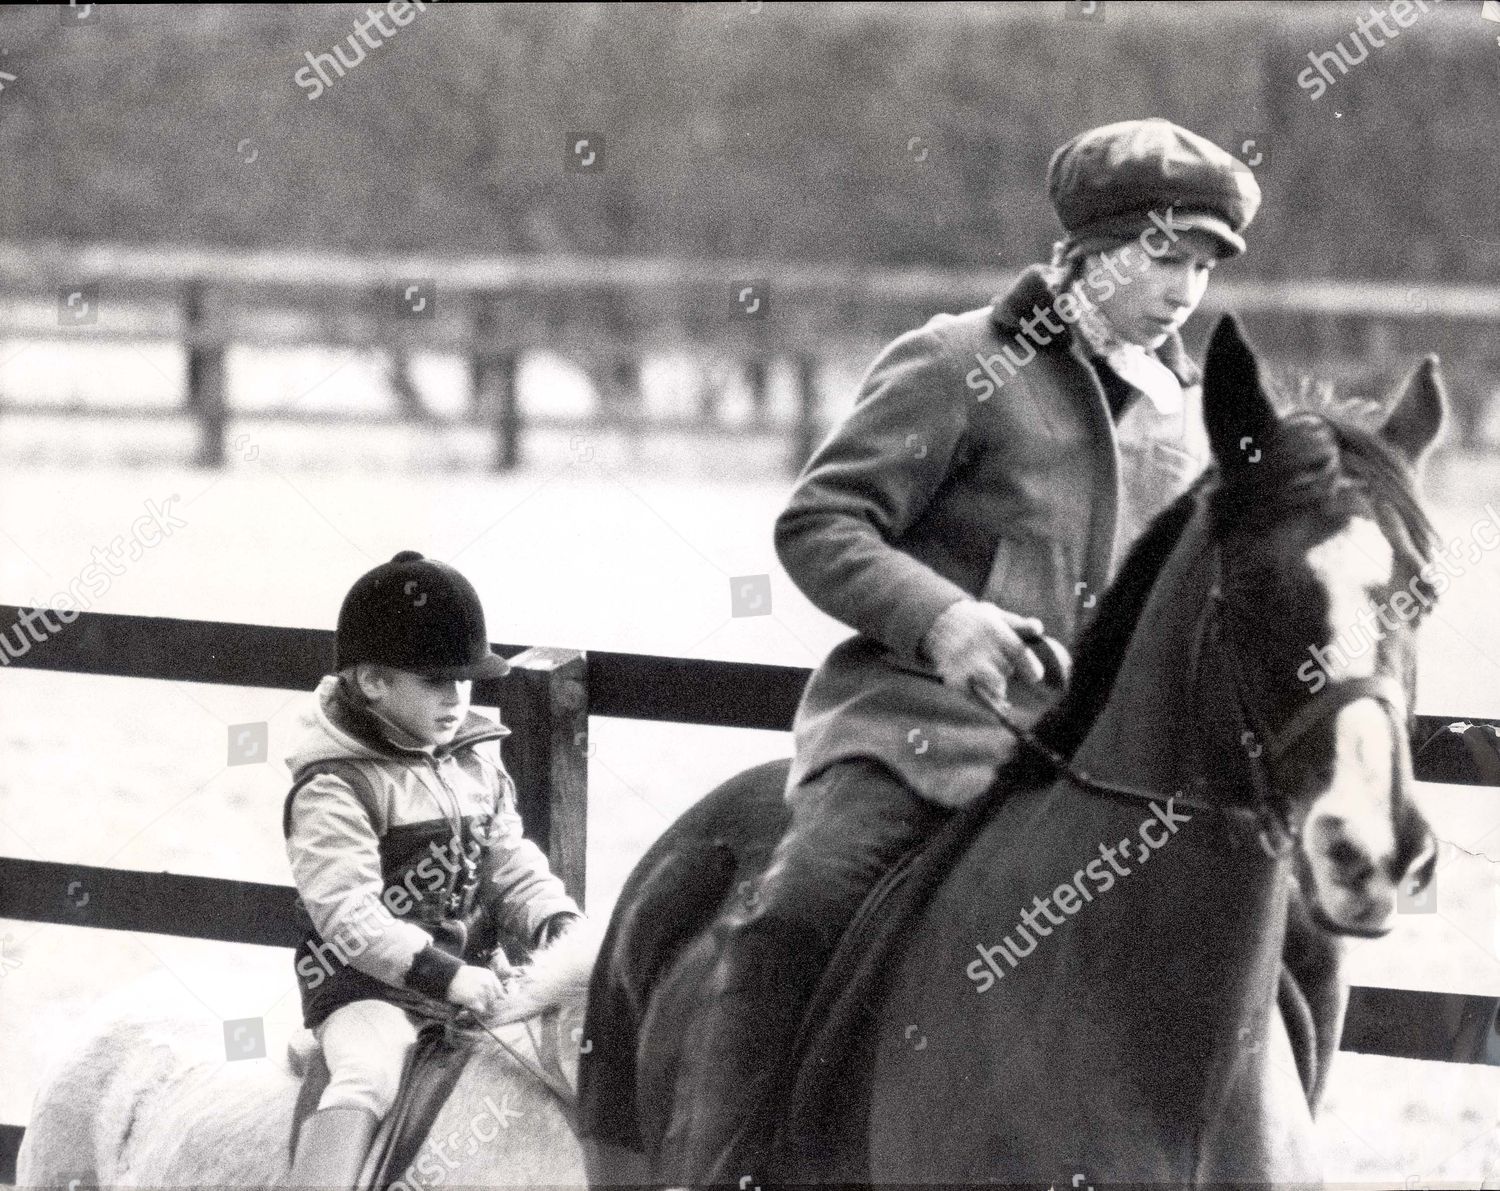 princess-anne-now-princess-royal-horse-riding-picture-shows-princess-anne-and-son-peter-phillips-going-riding-at-sandringham-1983-shutterstock-editorial-1043730a.jpg